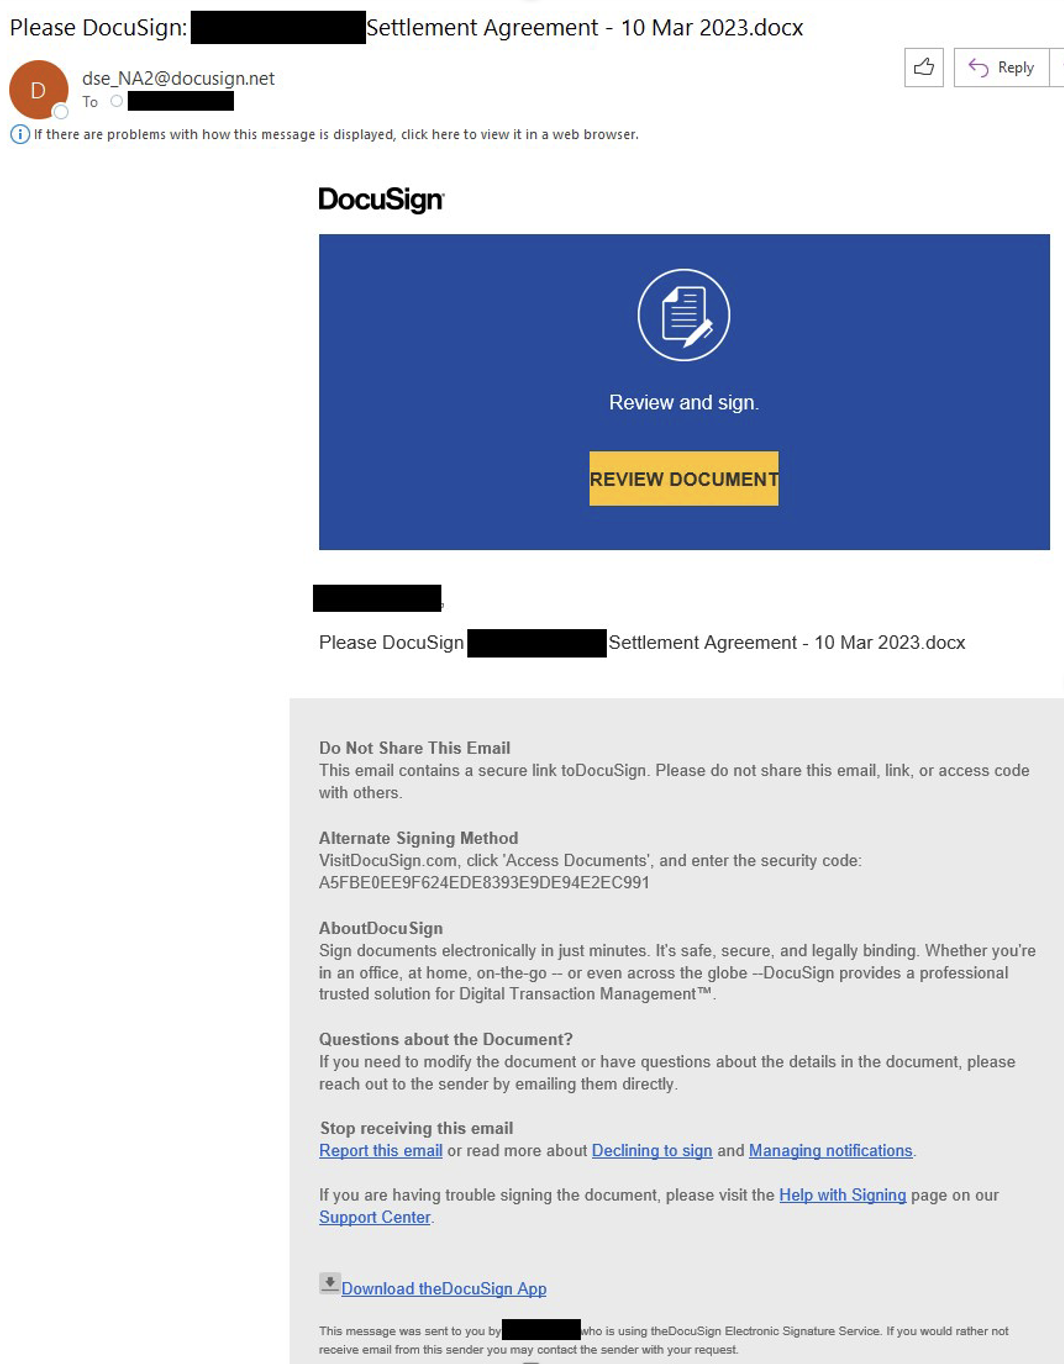 Indicators of a phish on DocuSign and SAP Phish